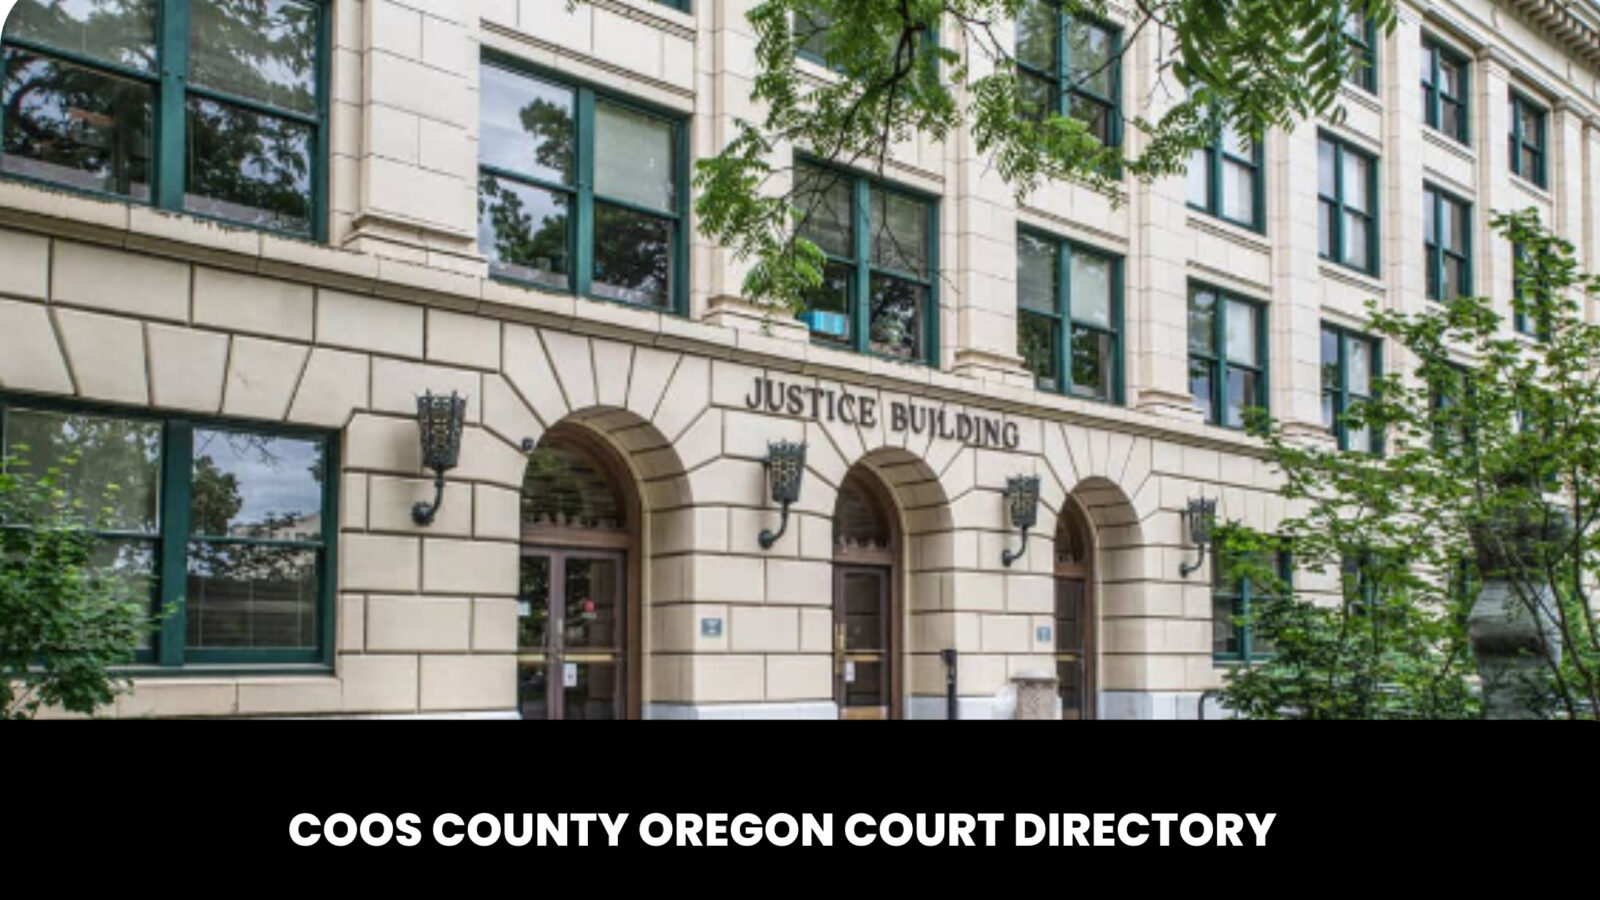 Coos County Oregon Court Directory